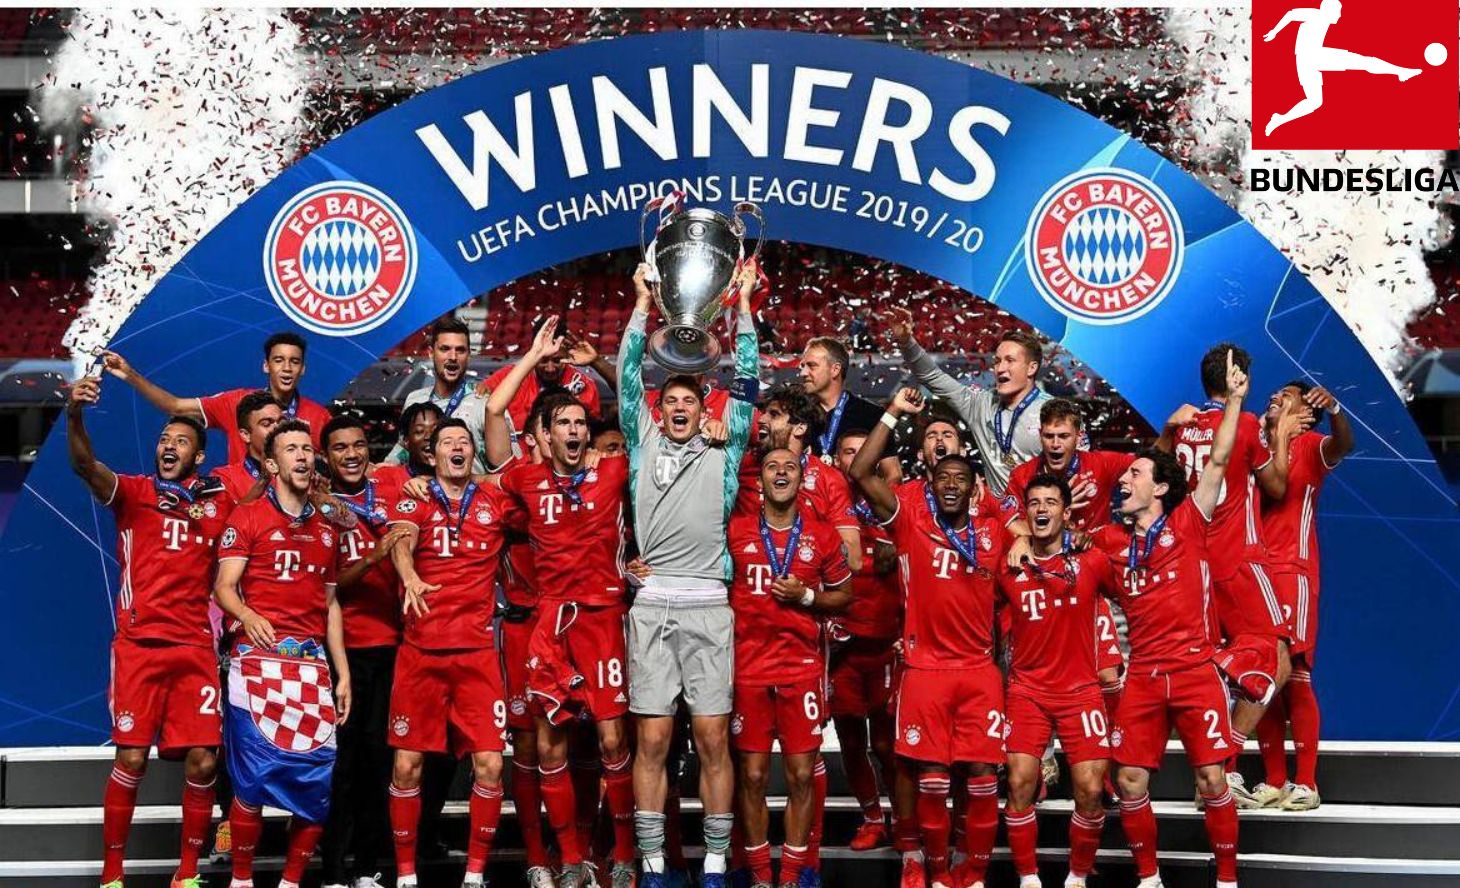 Bayern Munich: Fight back to win 11 titles in a row